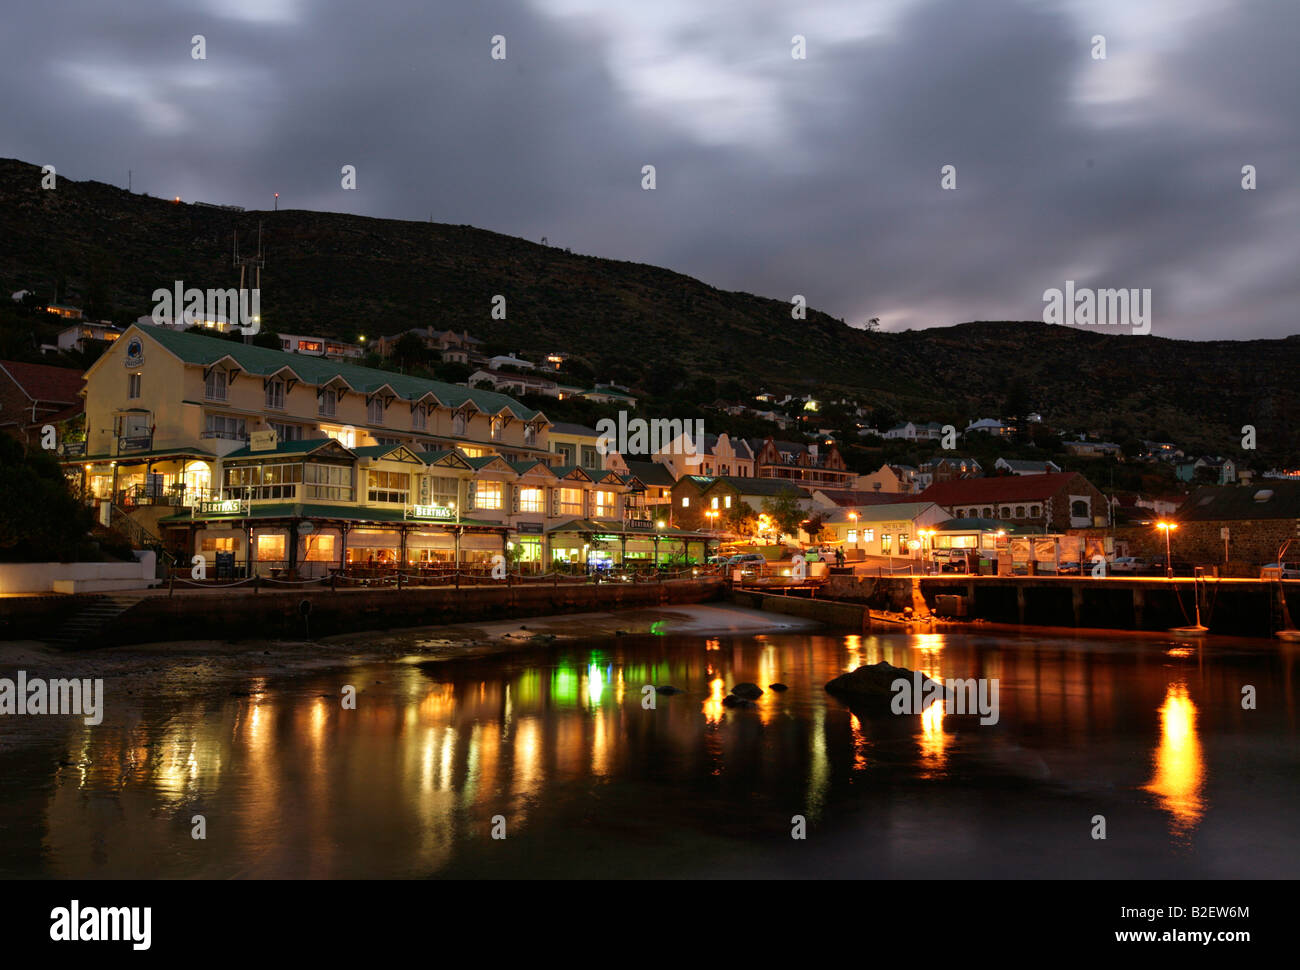 Lights reflected in the water at night at the Simon's town waterfront Stock Photo